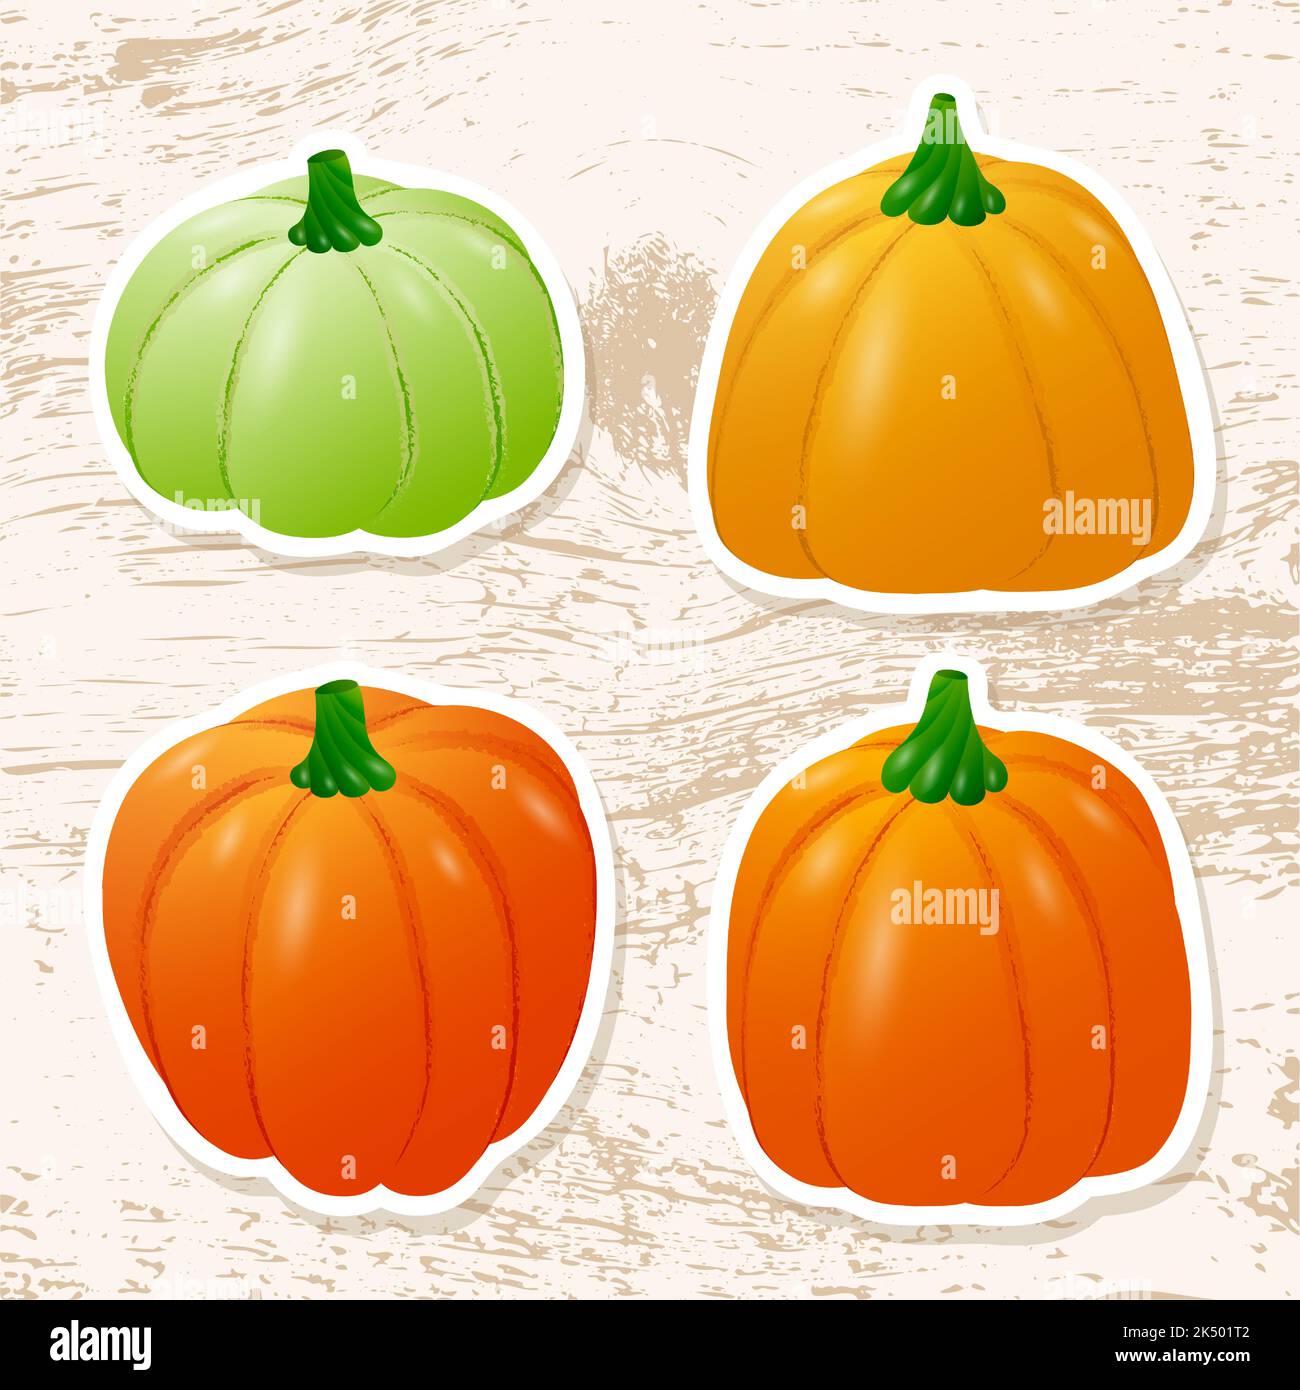 Cute stickers with orange pumpkins. Sticker with vegetables on a grunge background. Vector illustration. Stock Vector